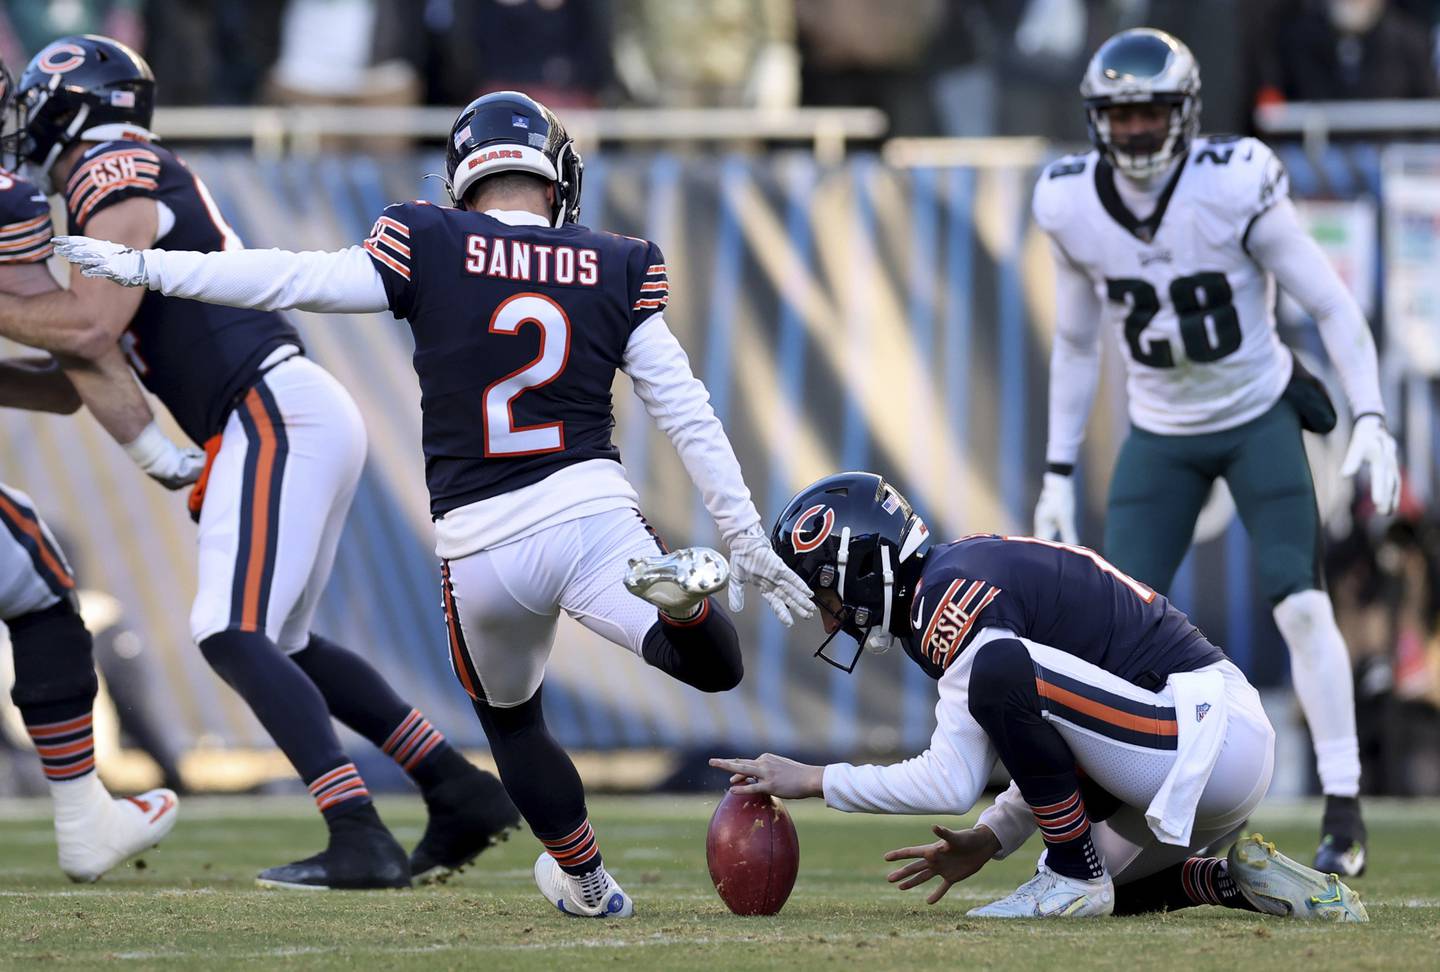 Bears kicker Cairo Santos kicks an extra point in the fourth quarter against the Eagles at Soldier Field on Dec. 18, 2022.